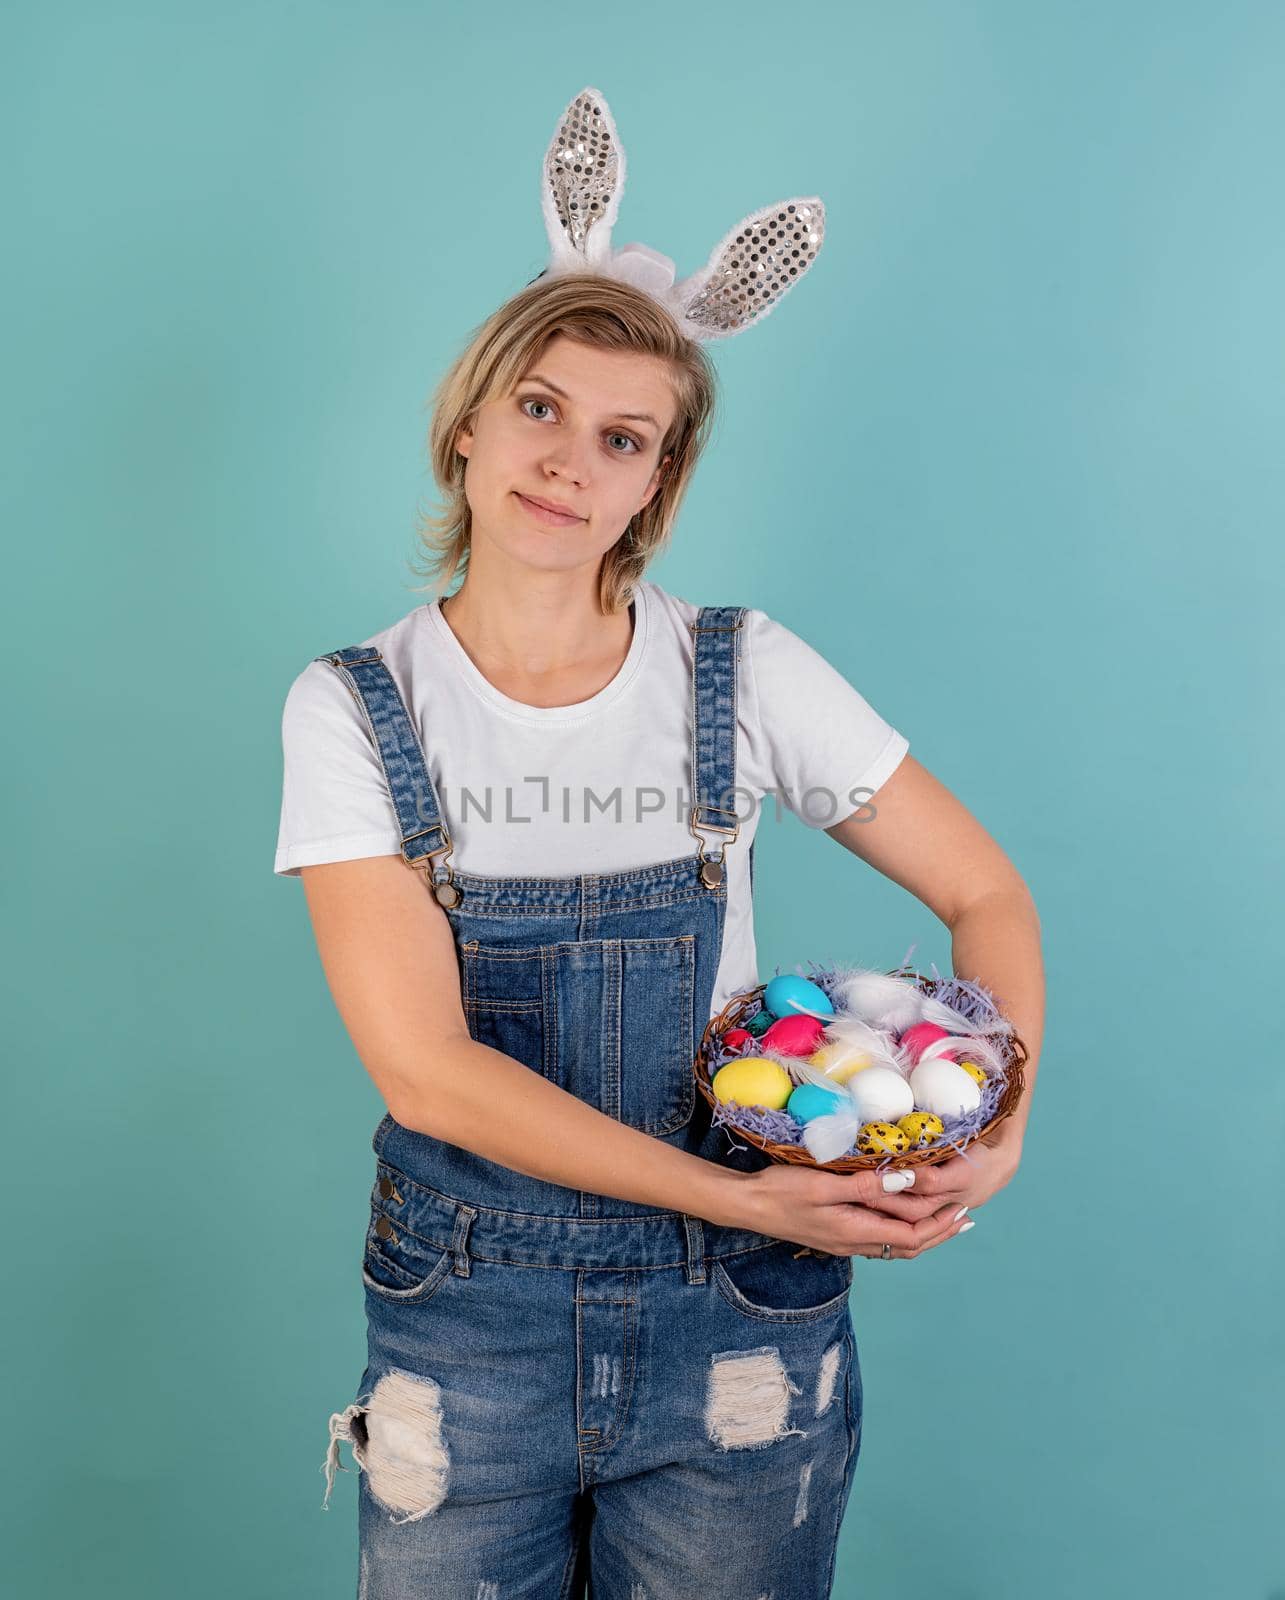 young woman in bunny ears holding a basket with Easter eggs isolated on blue background by Desperada